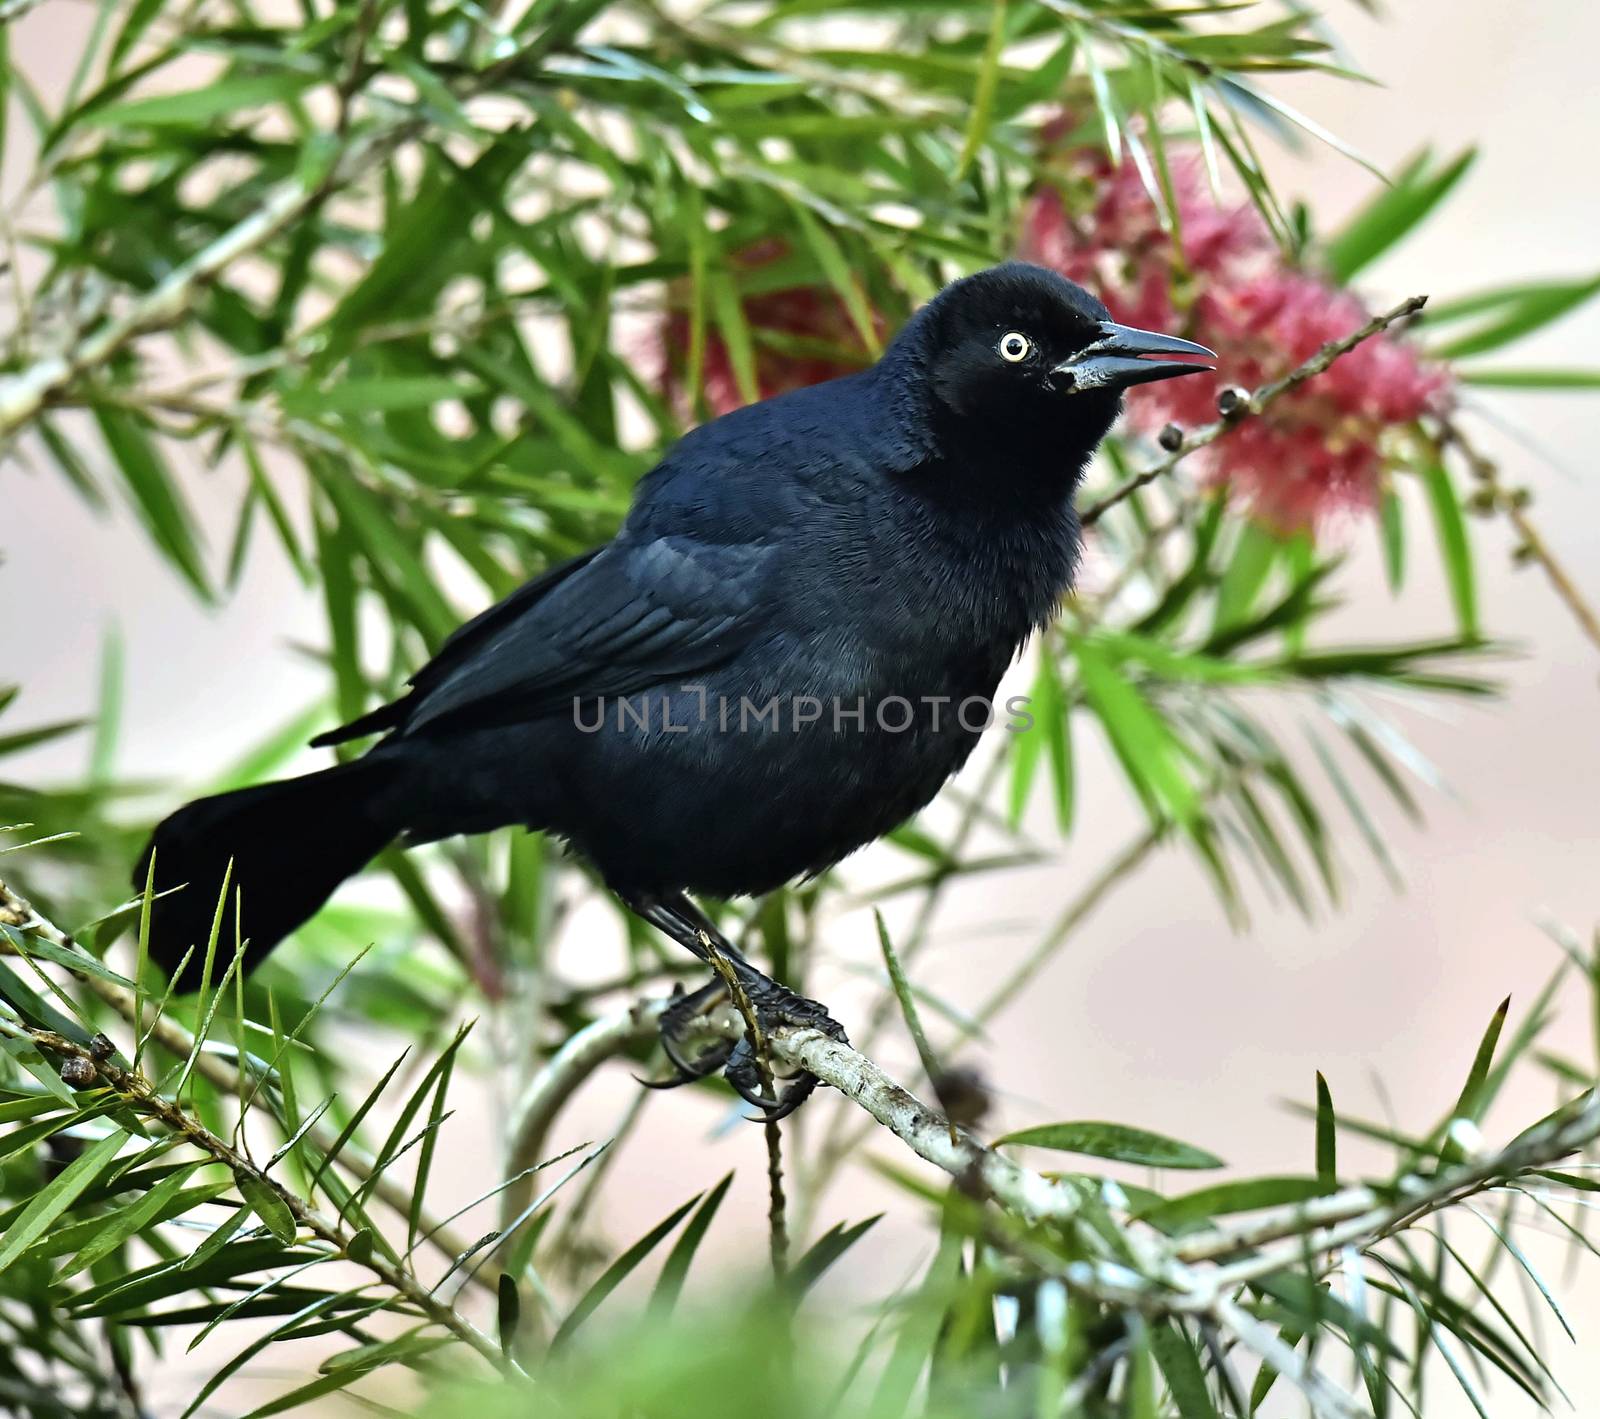 The Greater Antillean grackle (Quiscalus niger) perched on branch at La Boca, Republic of Cuba in March